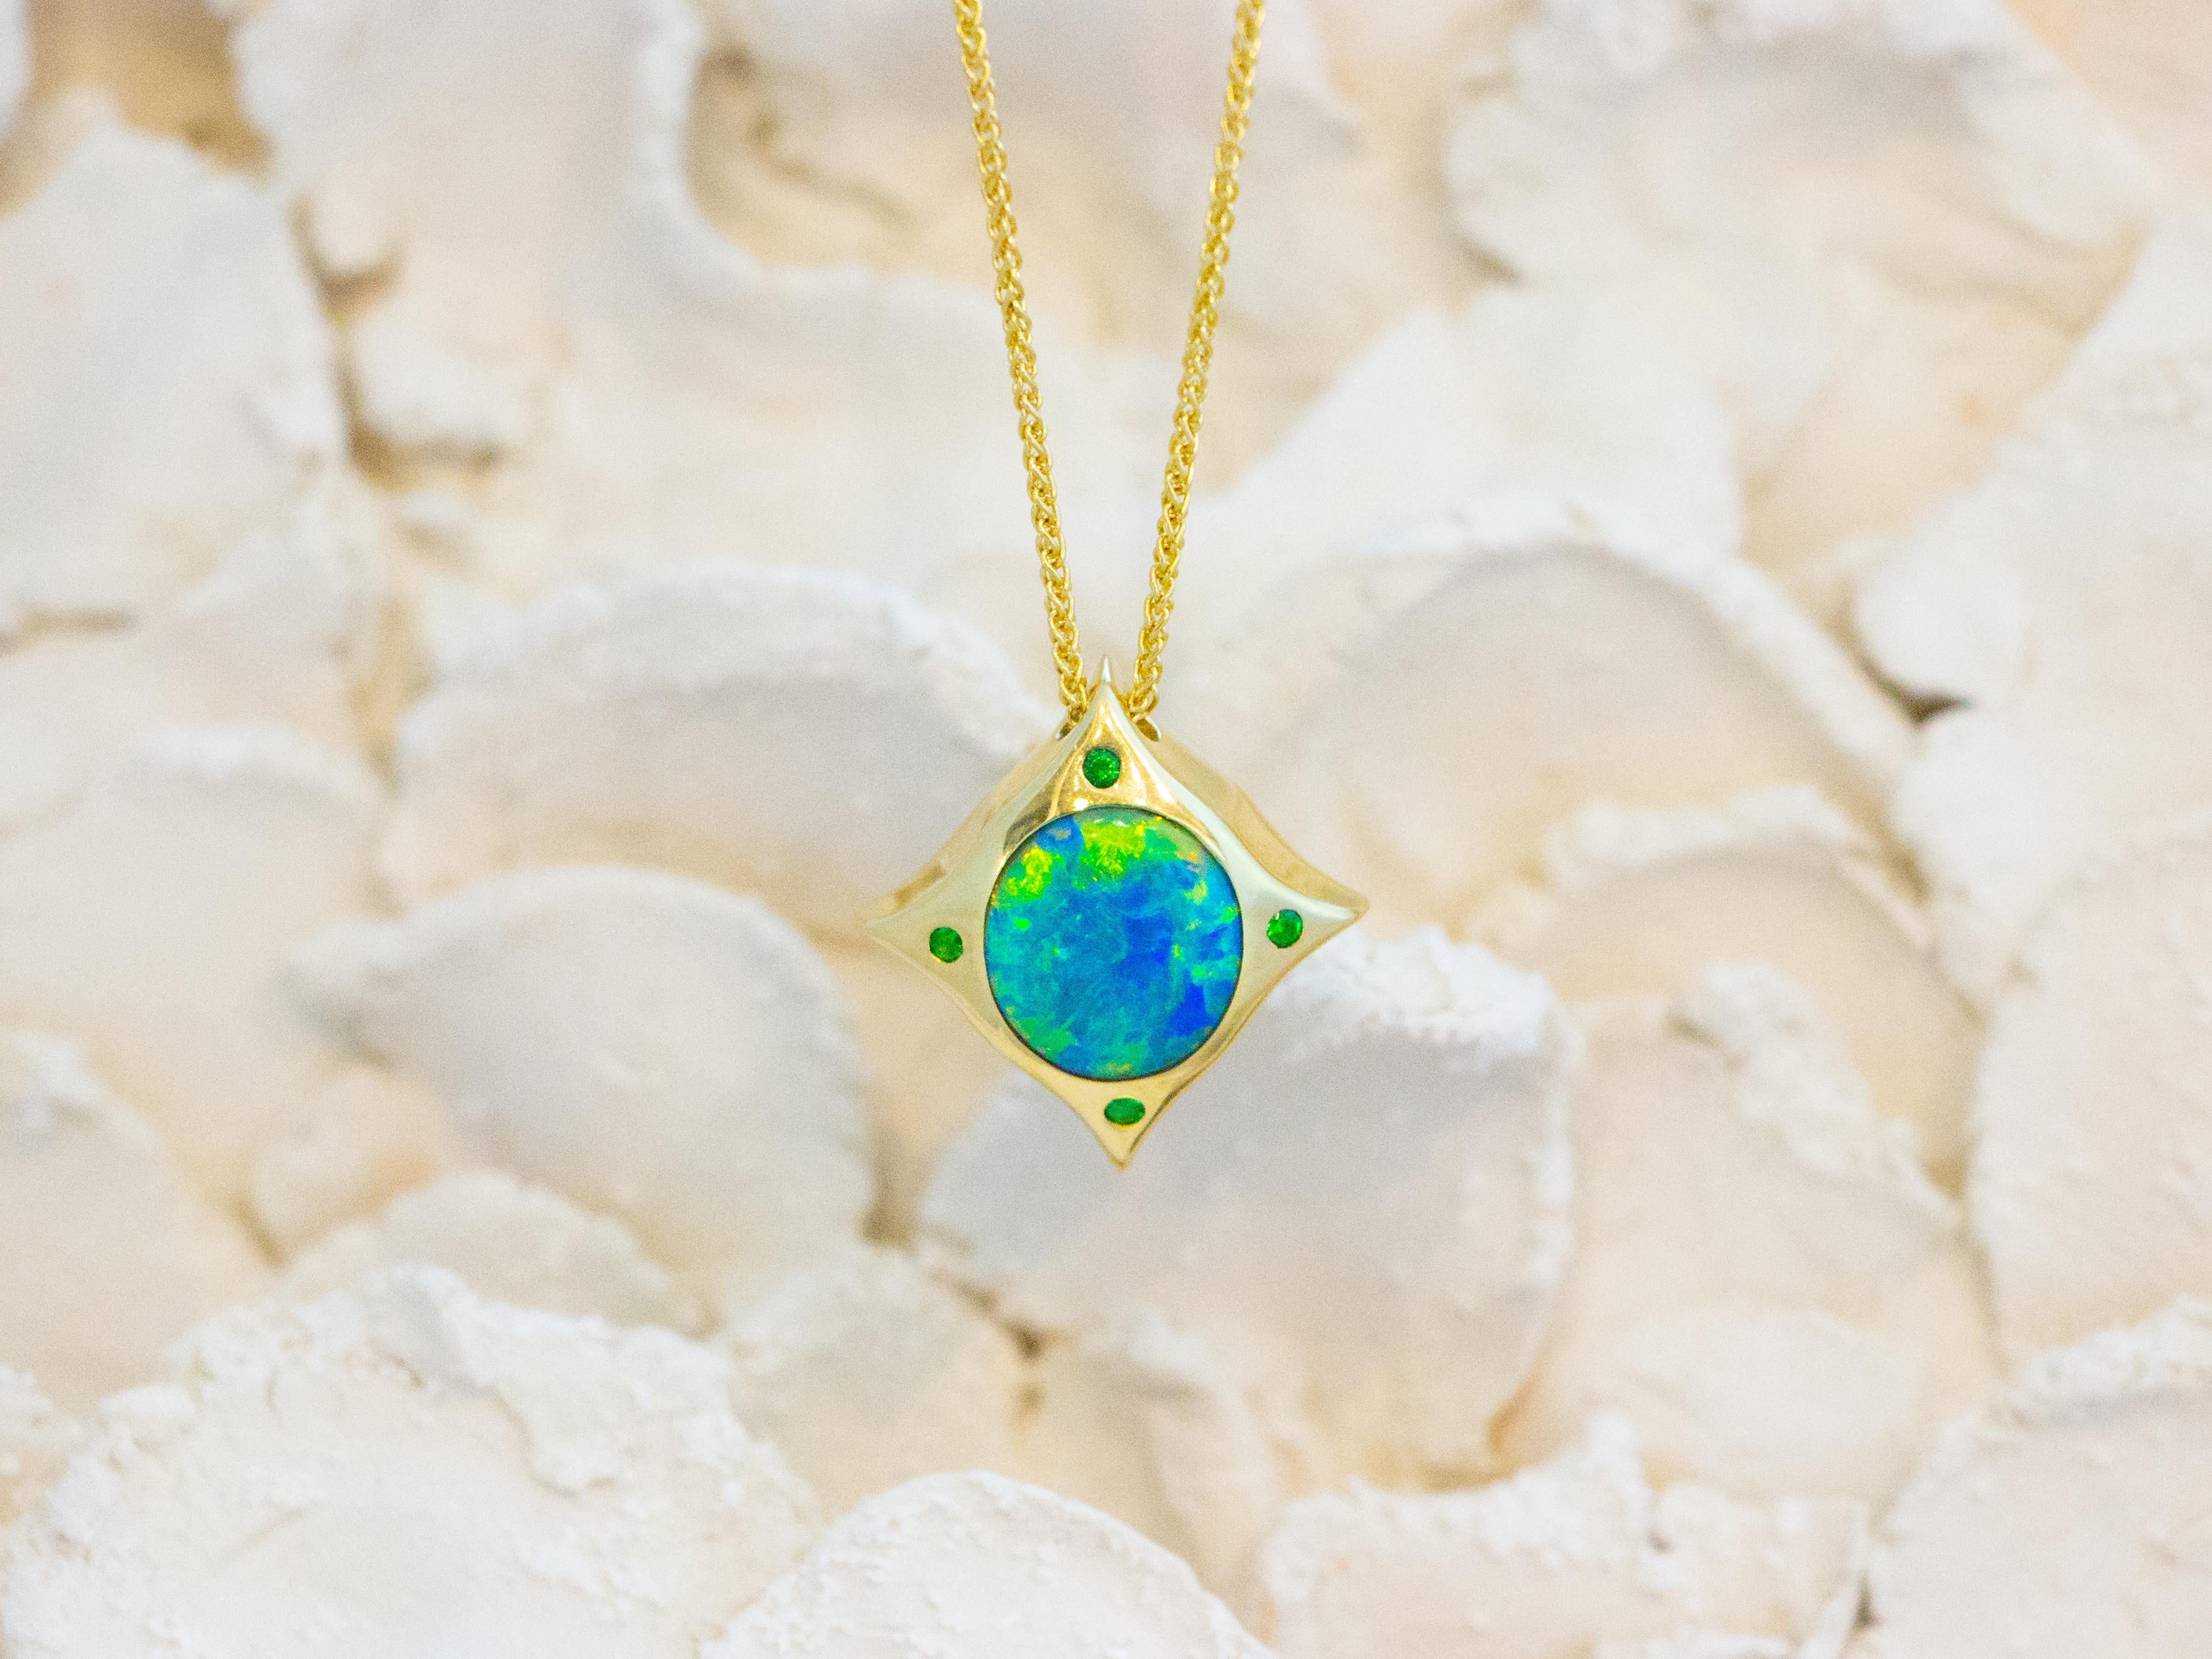 Compass Pendant. Wear this pendant everyday as a talisman. Mine to market solid 2.57 carat Australian Lightening Ridge opal set in hand fabricated 18 karat recycled gold bezel with tsavorites at the points. 
Dimensions: 1.9 cm x 1.8 cm x 0.6 cm